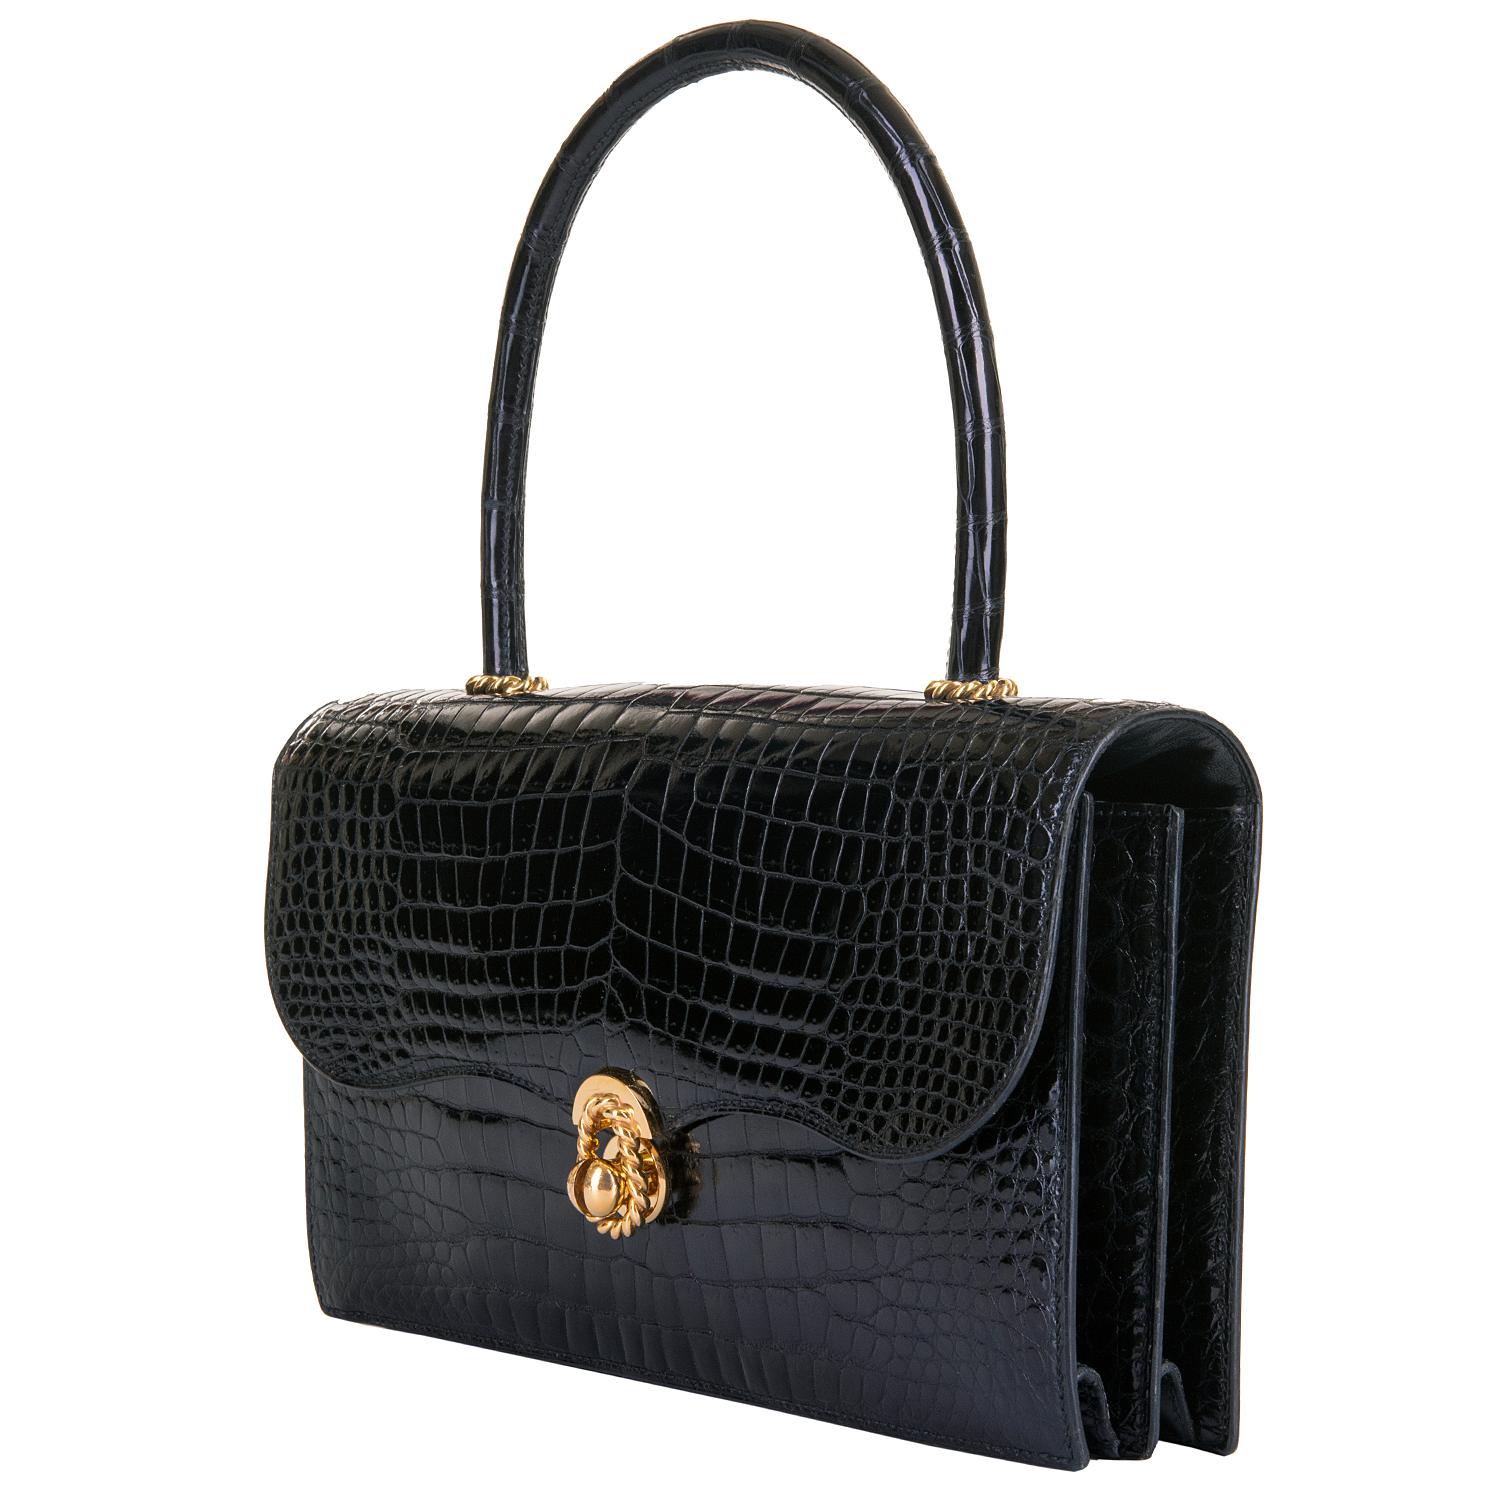 In pristine condition, inside and out, this Beautiful Hermes Vintage Handbag is finished in Black Shiny Porosus Crocodile, accented with Gold 'Cordeliere' Hardware. The rigid design of the bag & handle, means it has retained it's original shape and